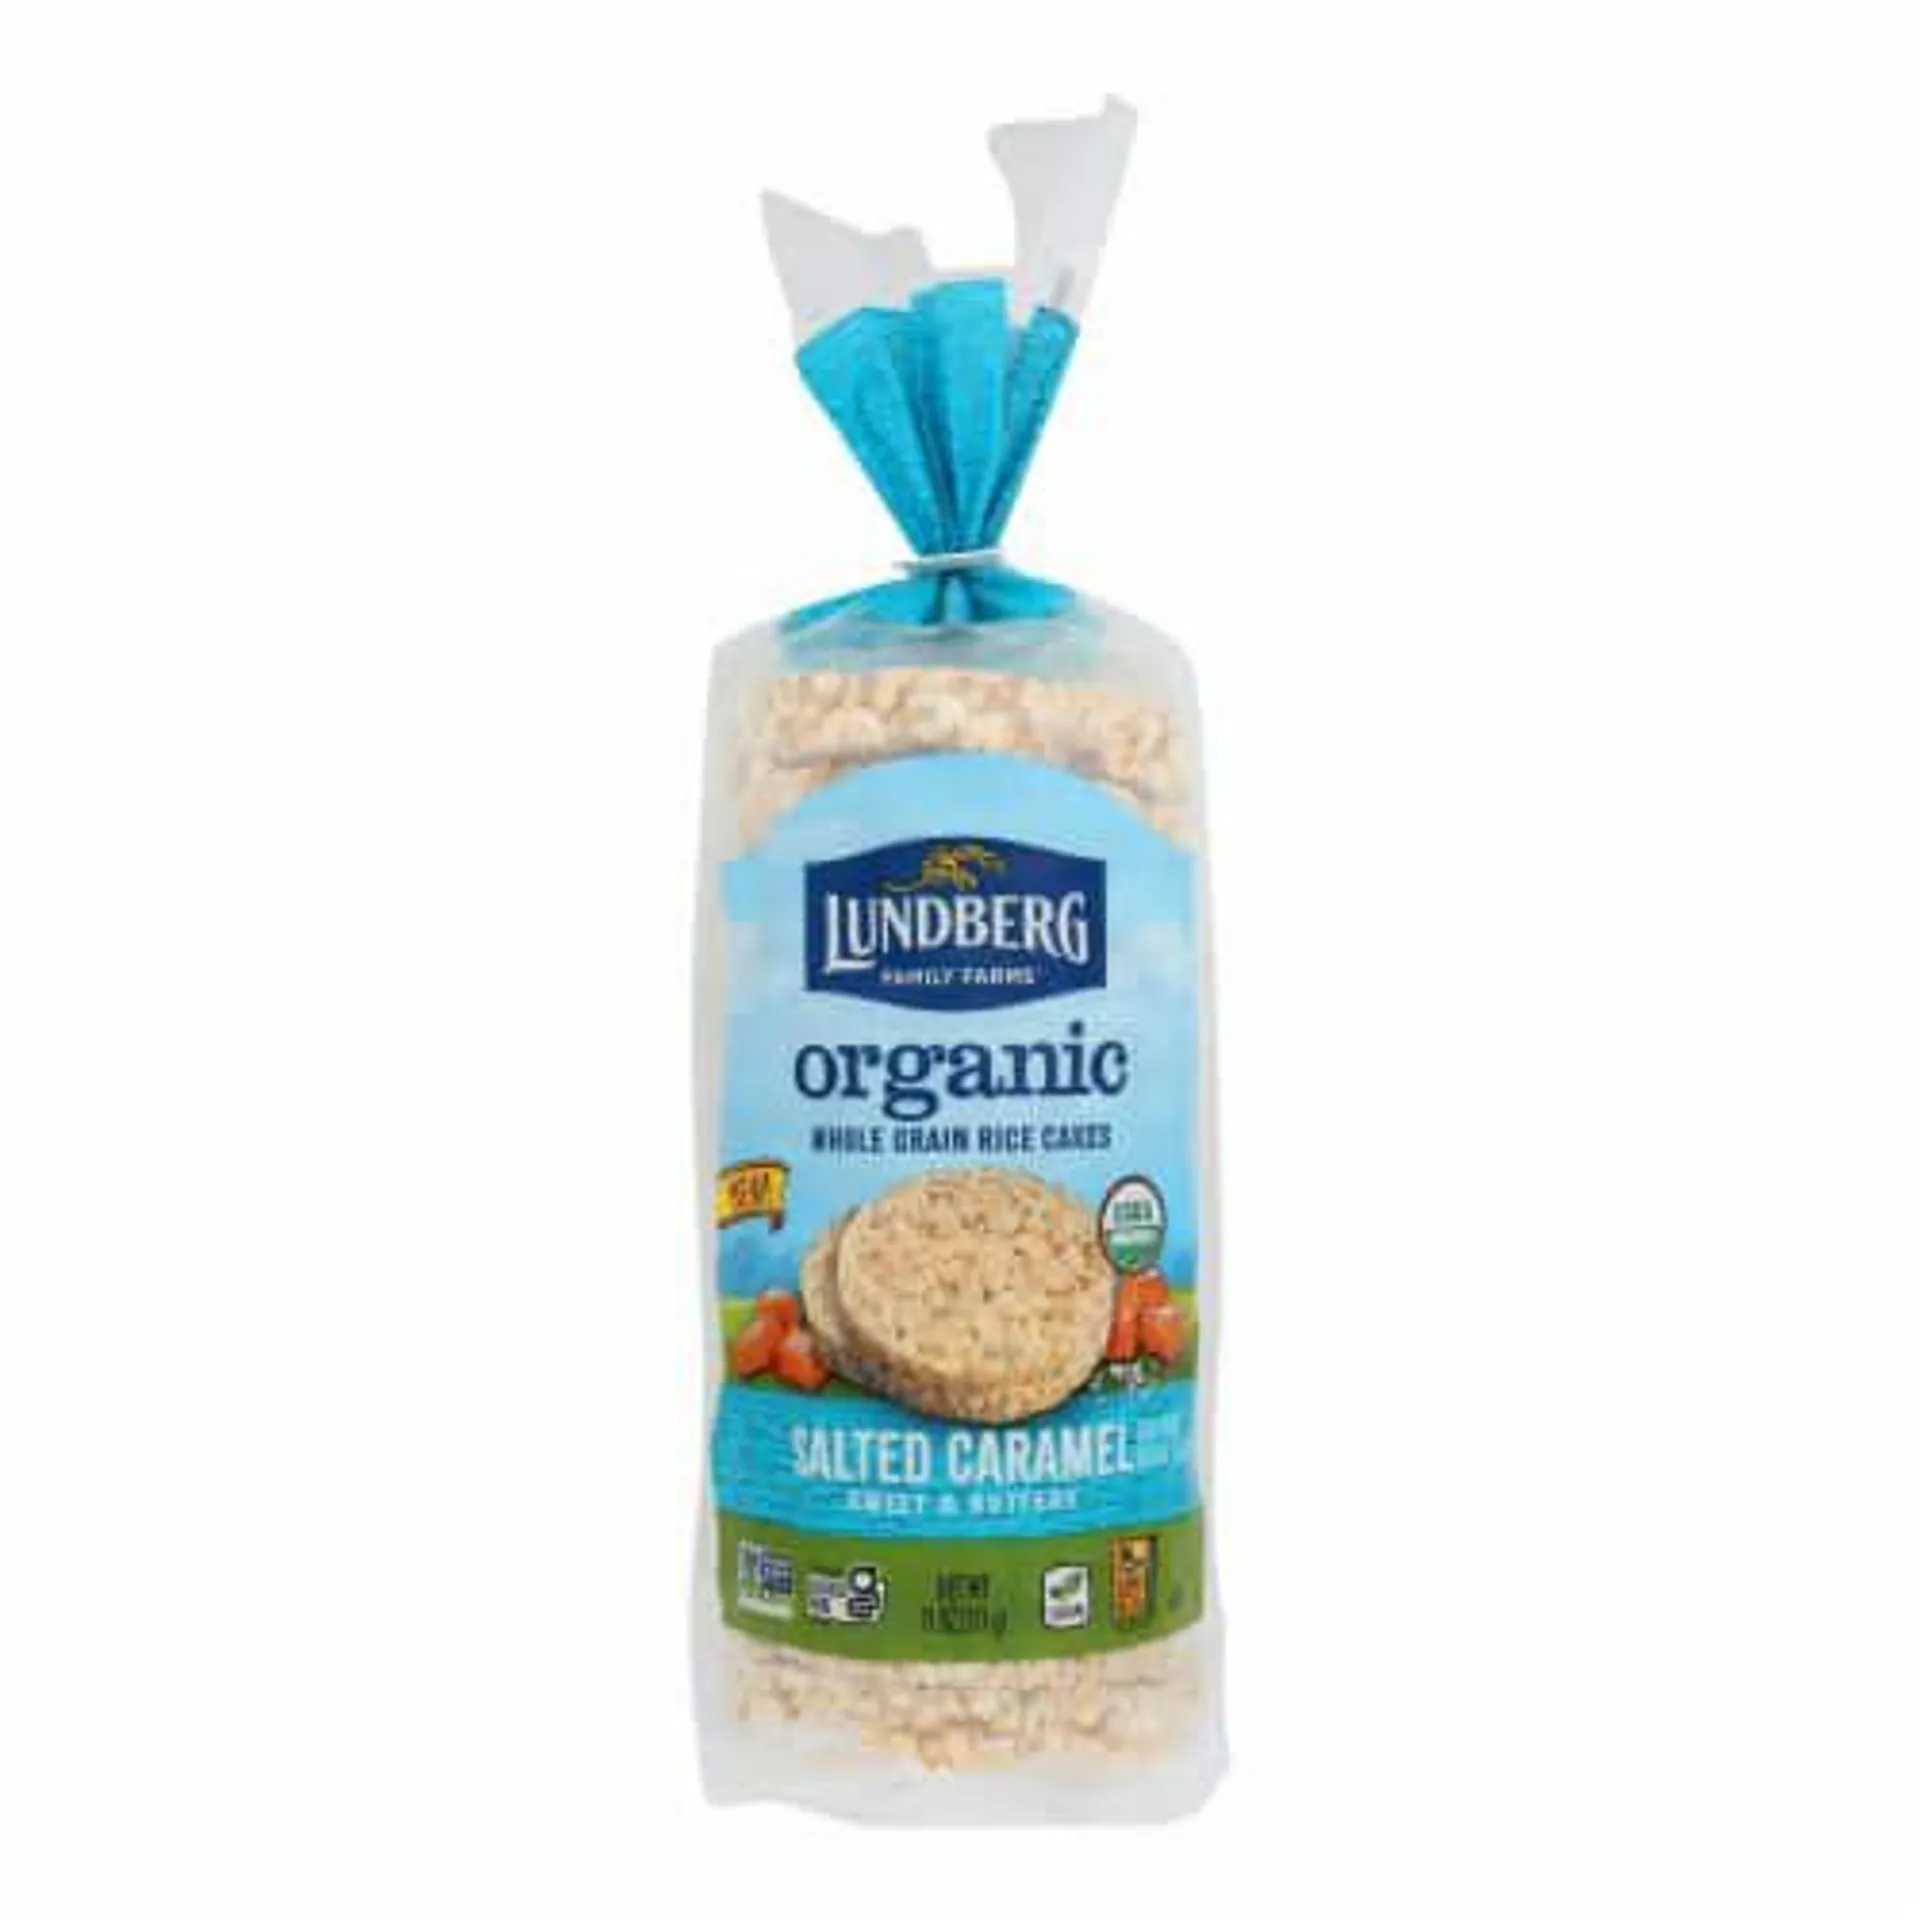 Lundberg Family Farms - Rice Cake Salted Caramel 11 oz (Pack of 6)